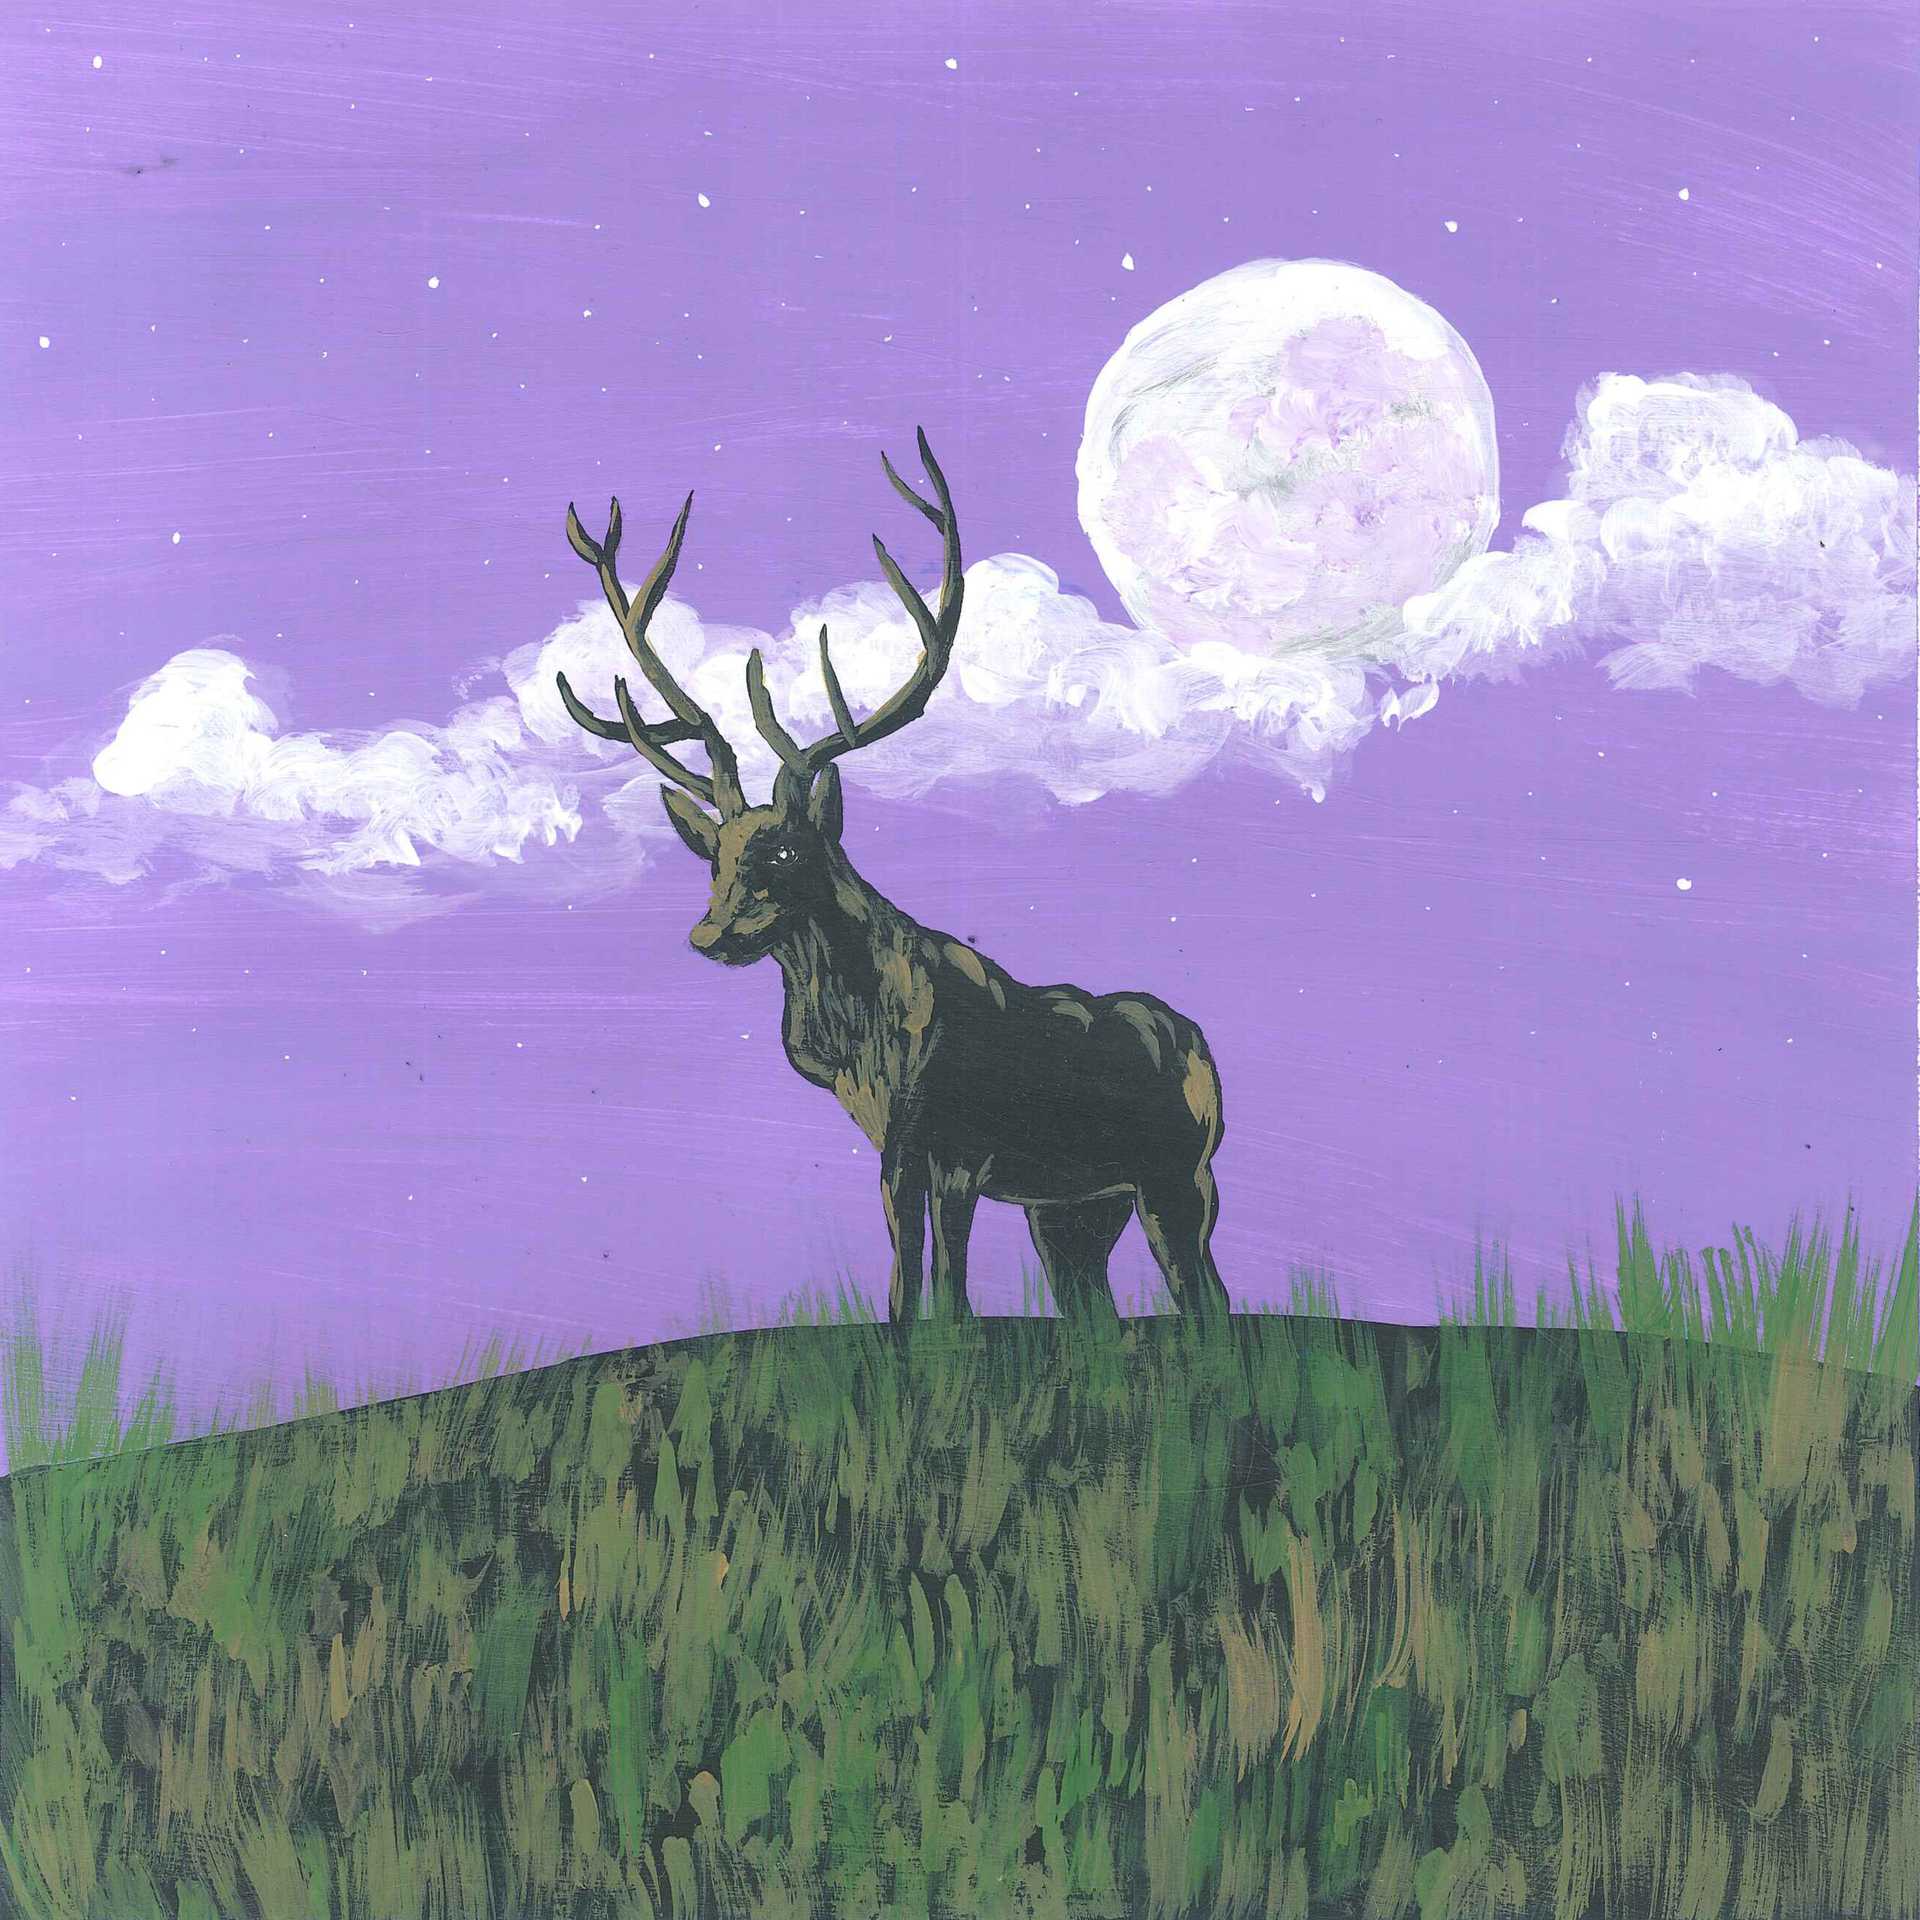 Red Deer on the Field - earth.fm